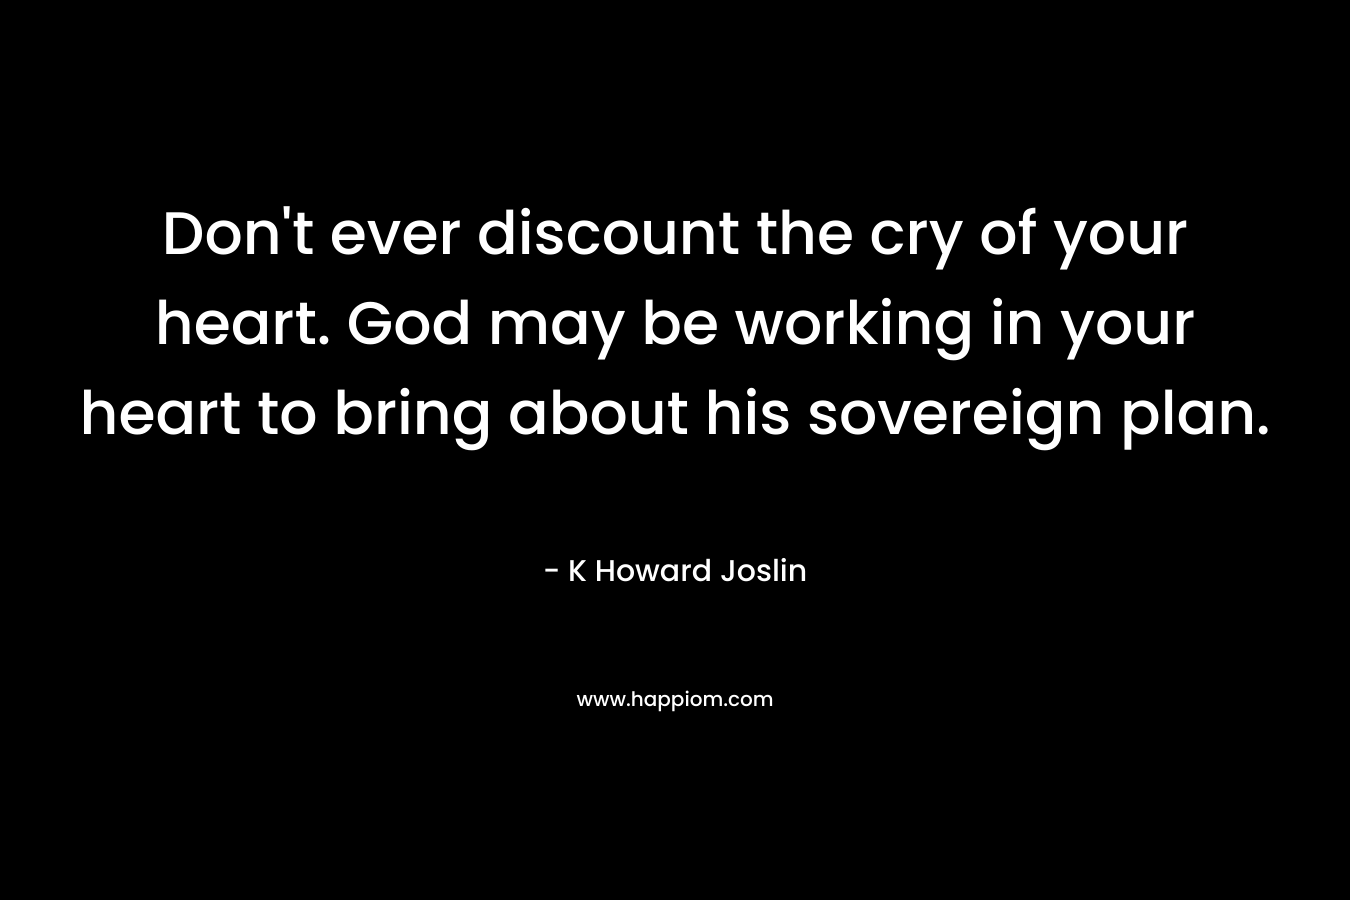 Don't ever discount the cry of your heart. God may be working in your heart to bring about his sovereign plan.